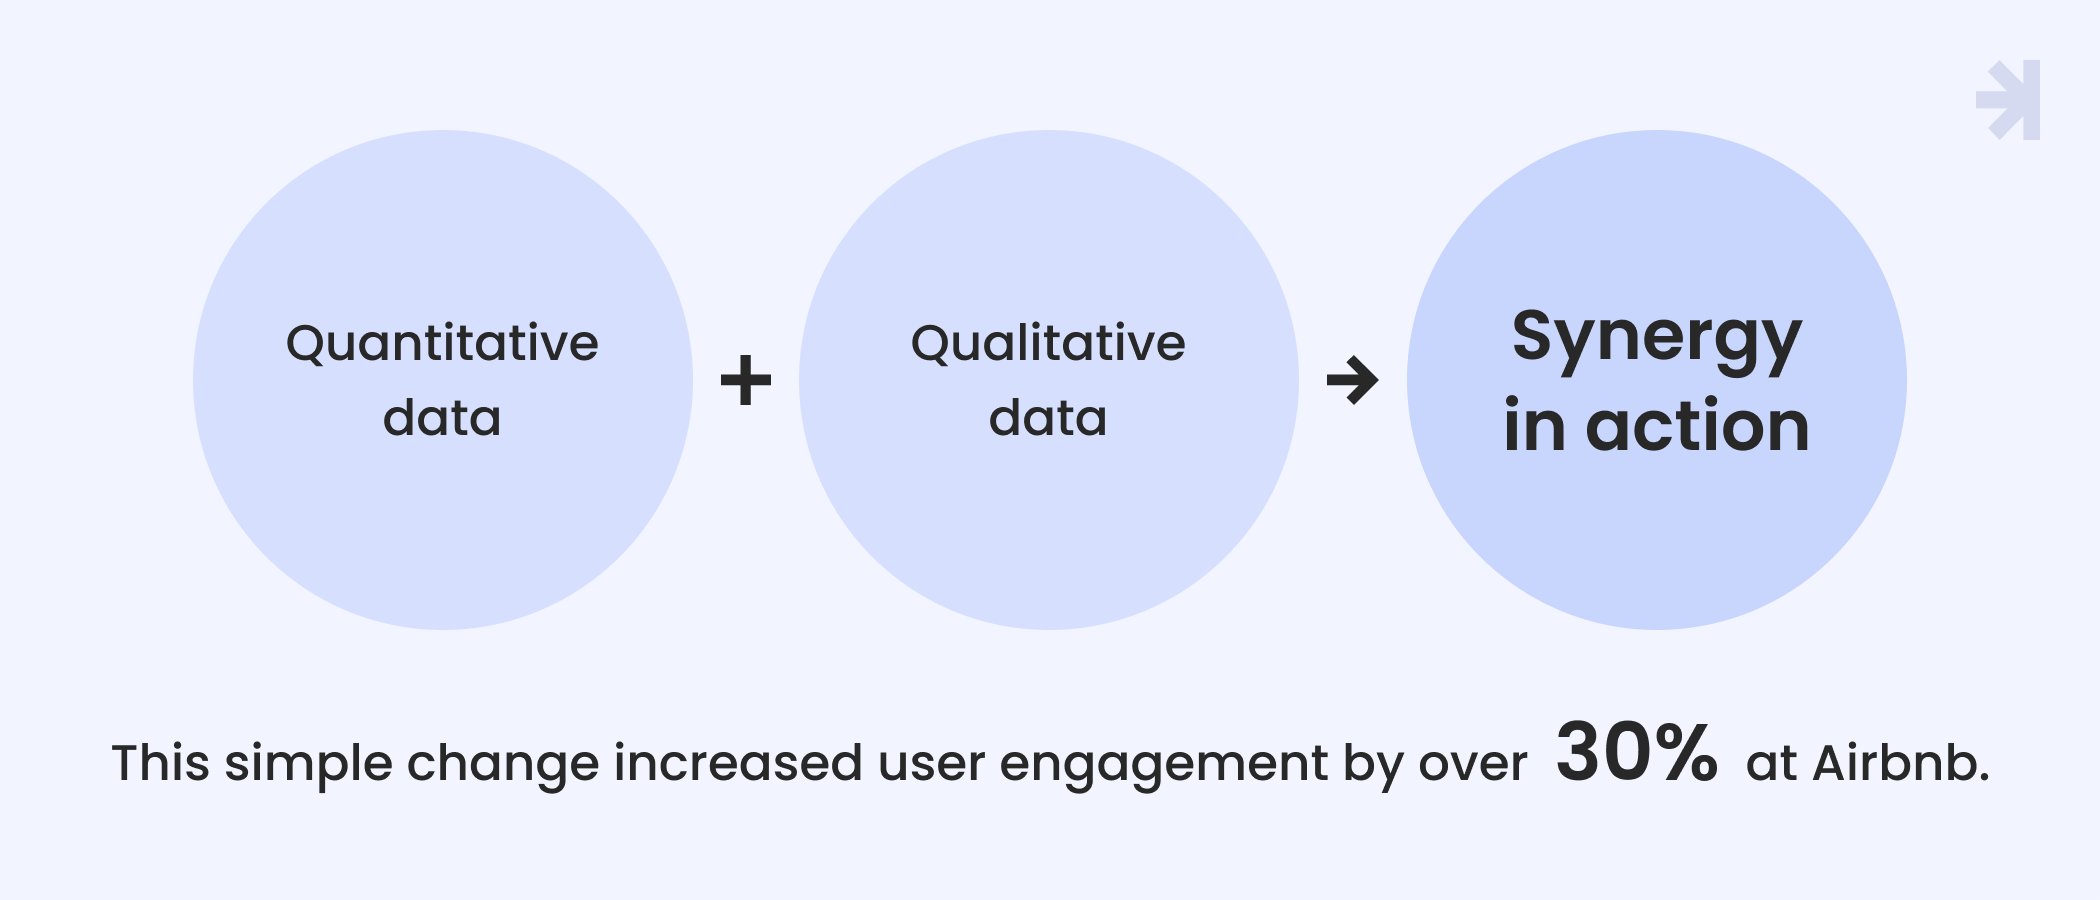 Synergy in action: Integrating quantitative and qualitative data